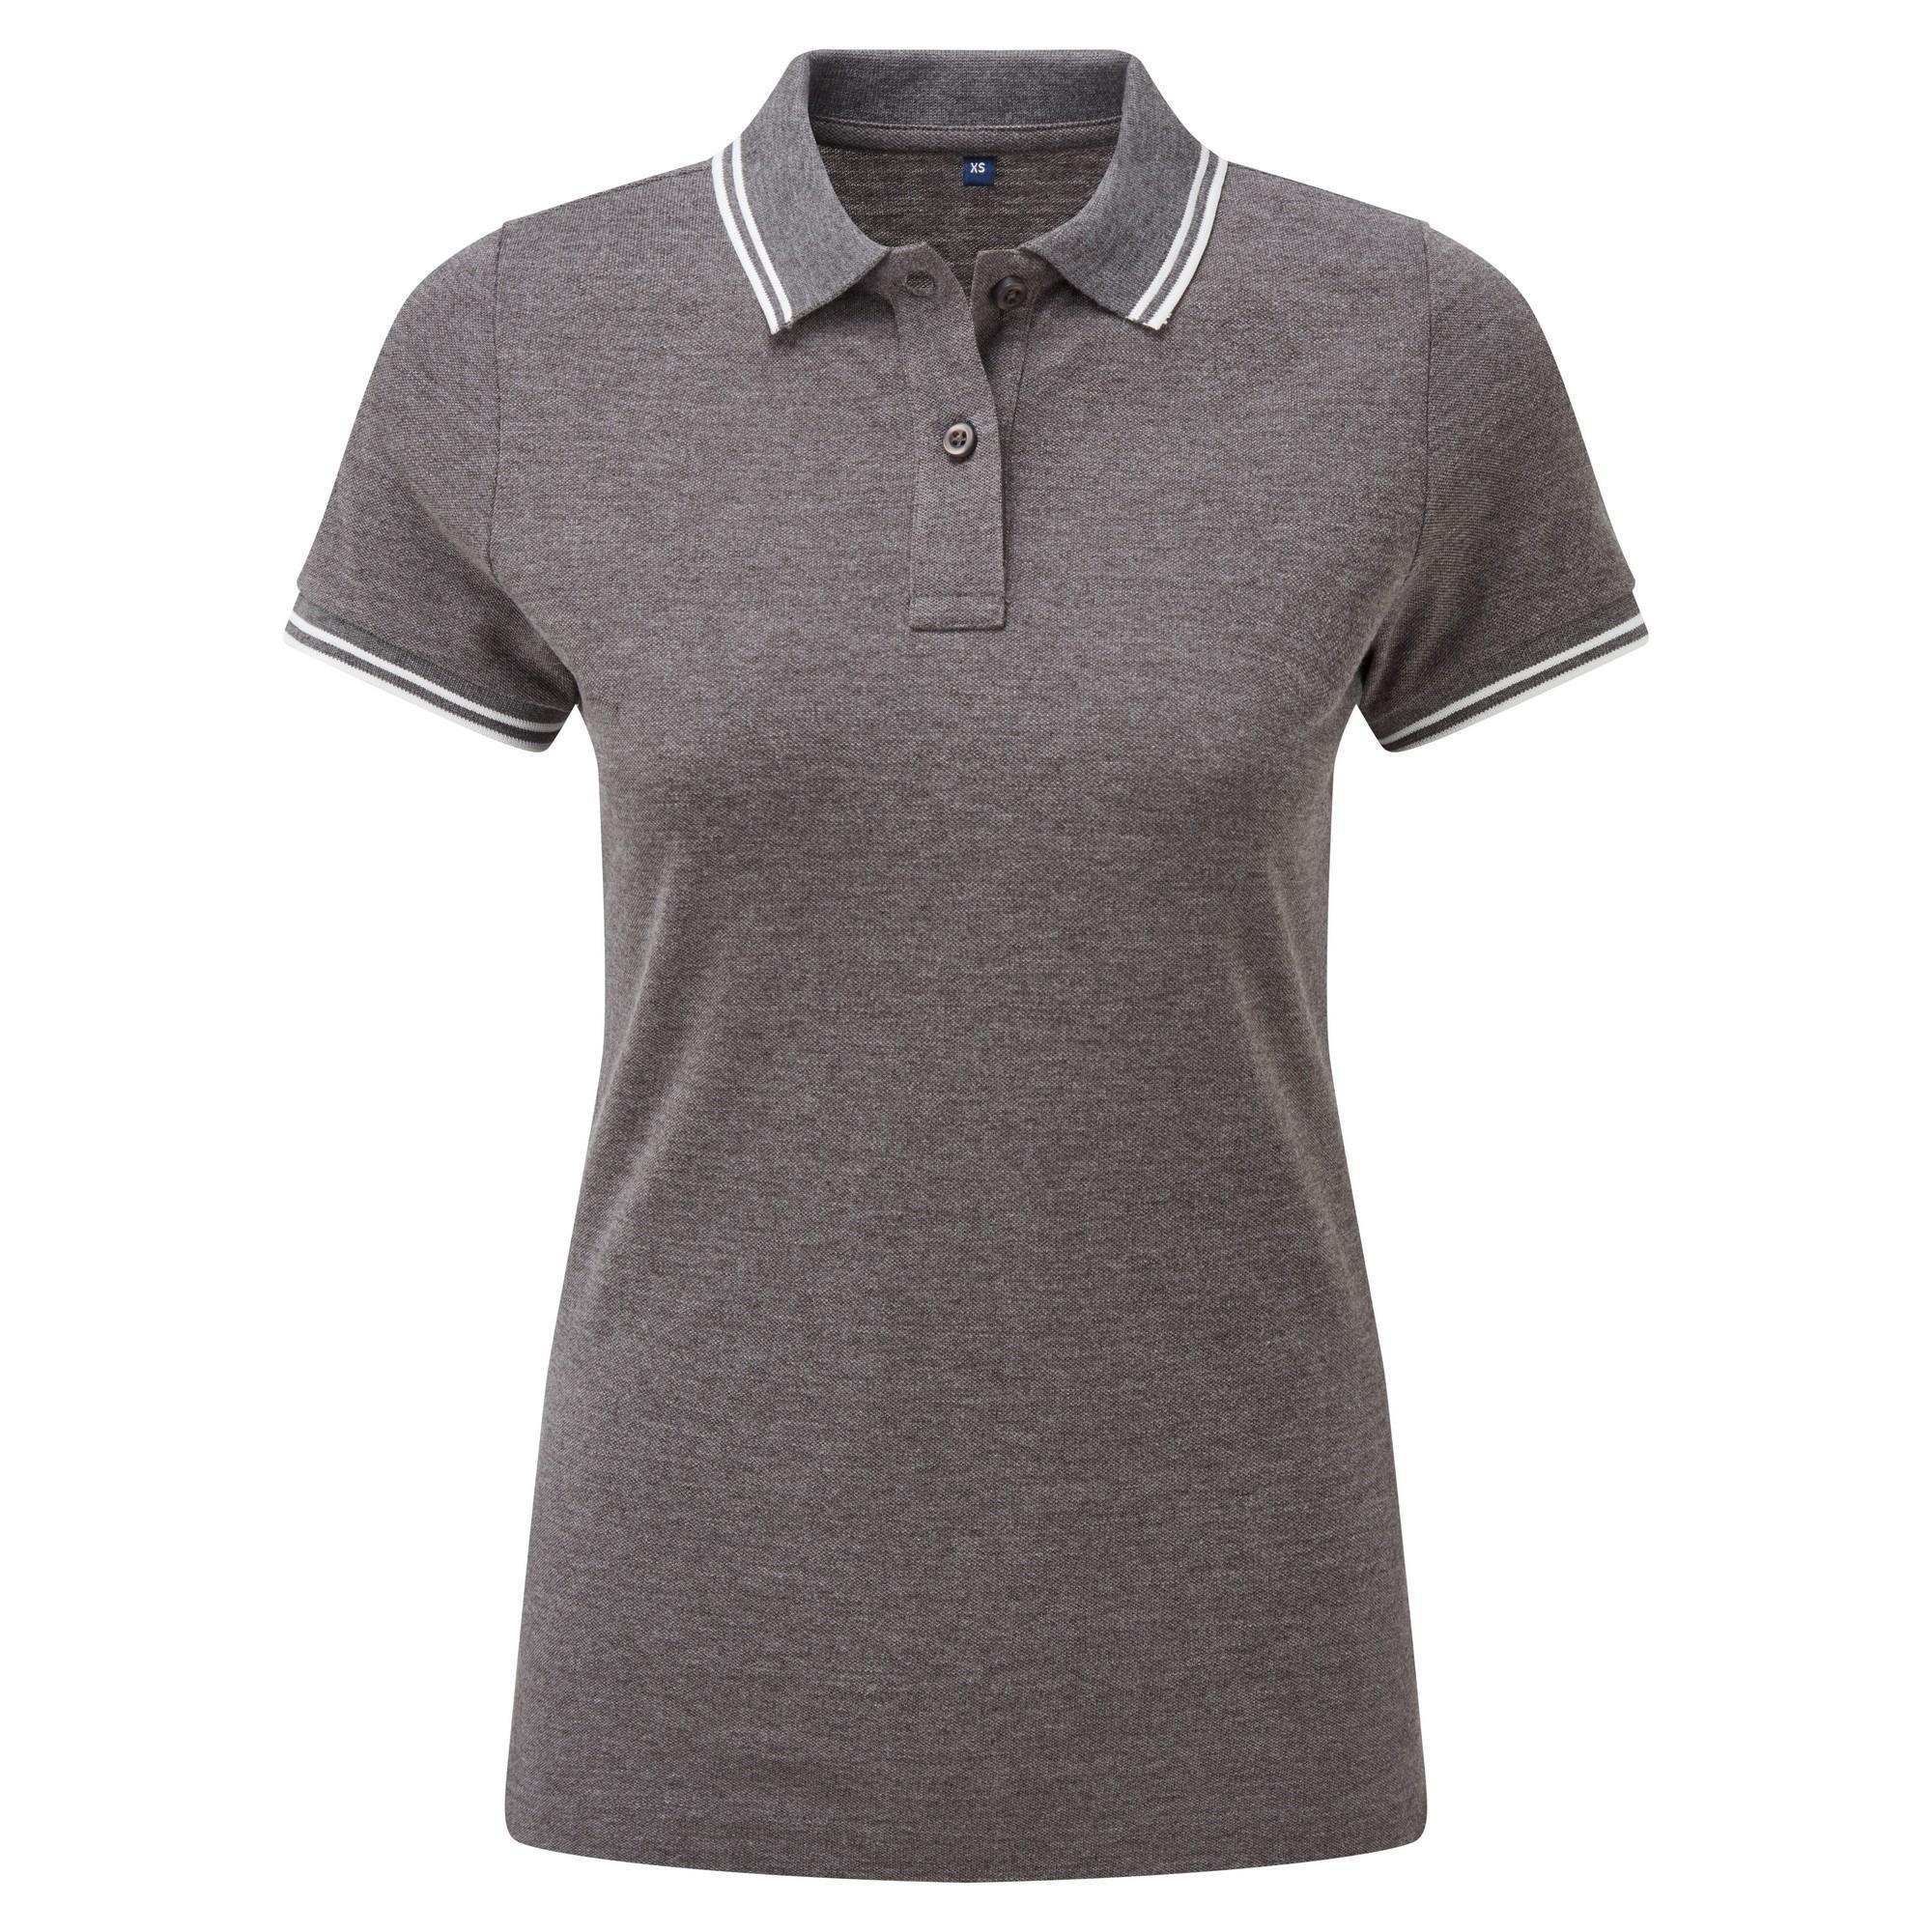 Asquith & Fox Womens/Ladies Classic Fit Tipped Polo (Charcoal/White) (M)